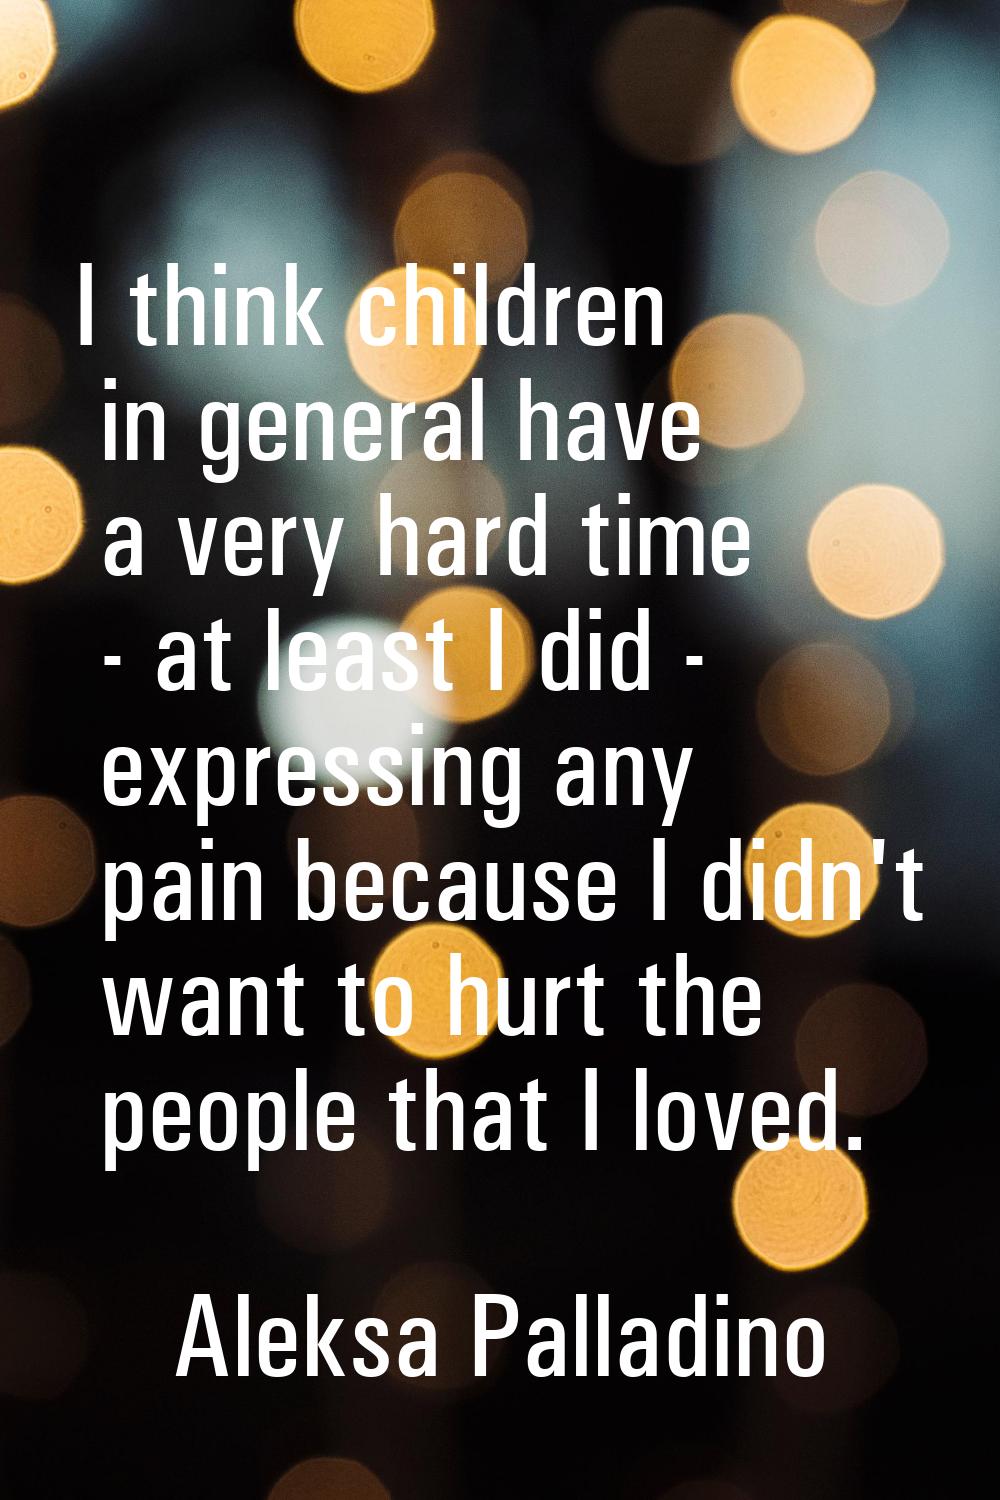 I think children in general have a very hard time - at least I did - expressing any pain because I 